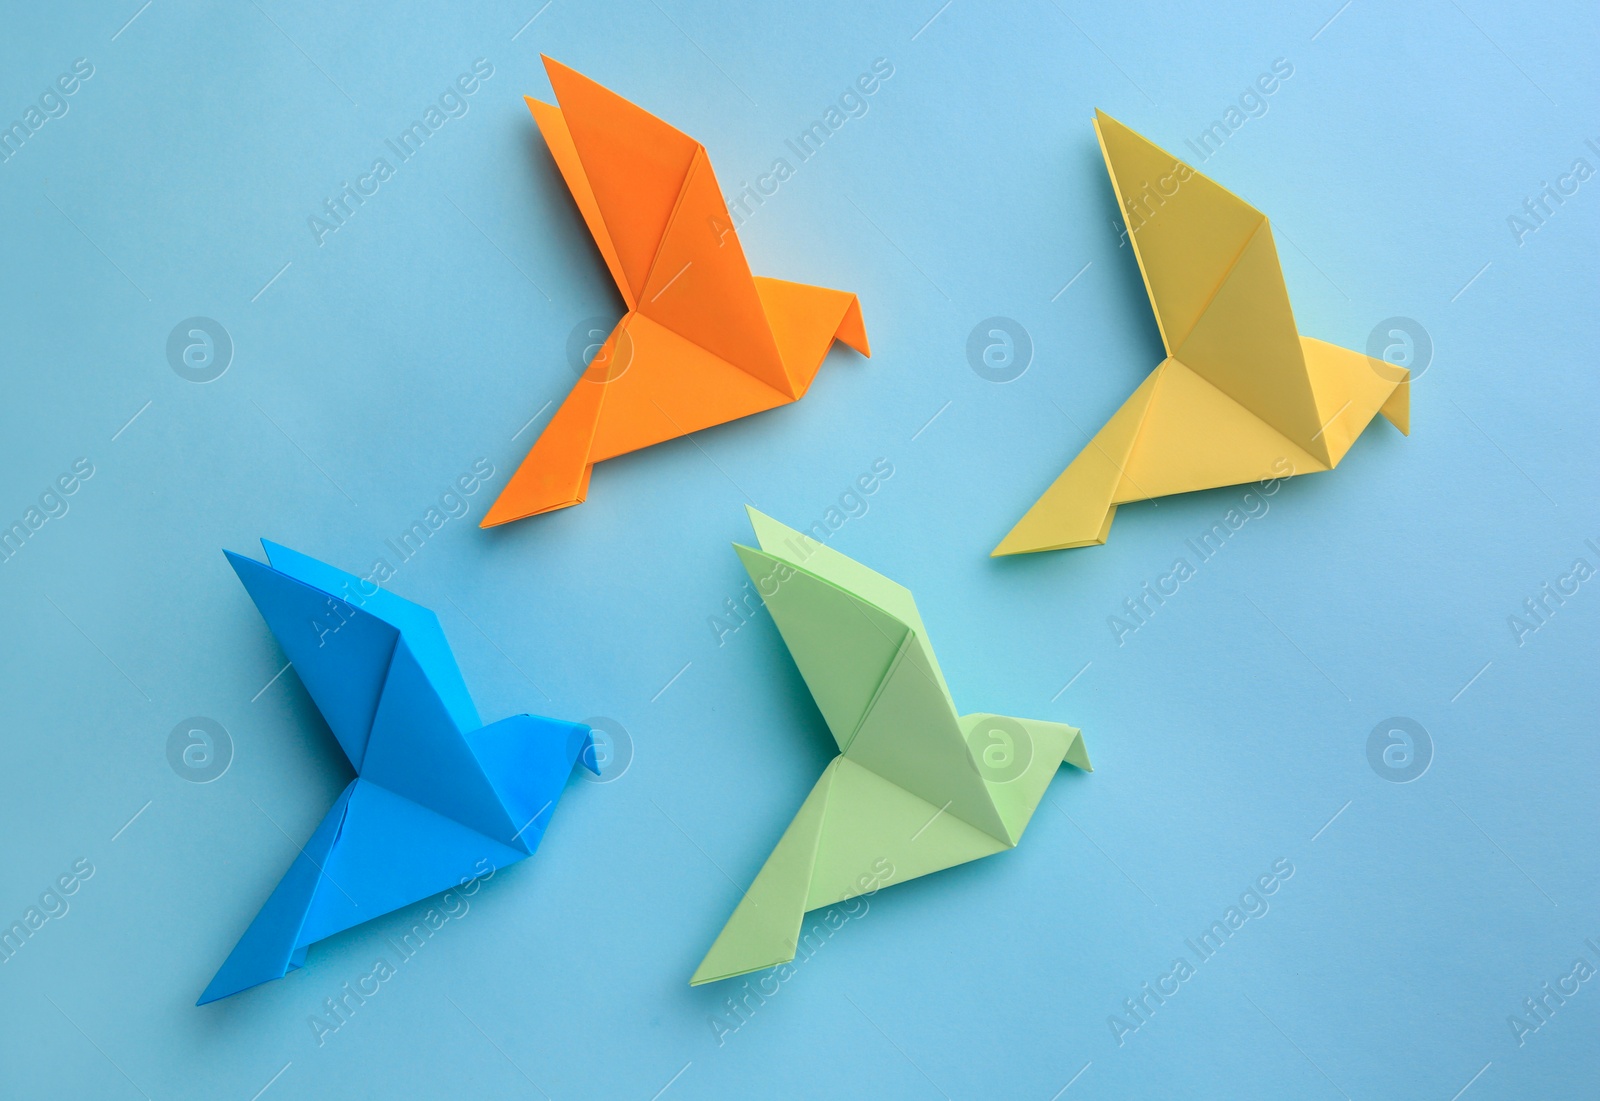 Photo of Origami art. Colorful handmade paper birds on light blue background, flat lay